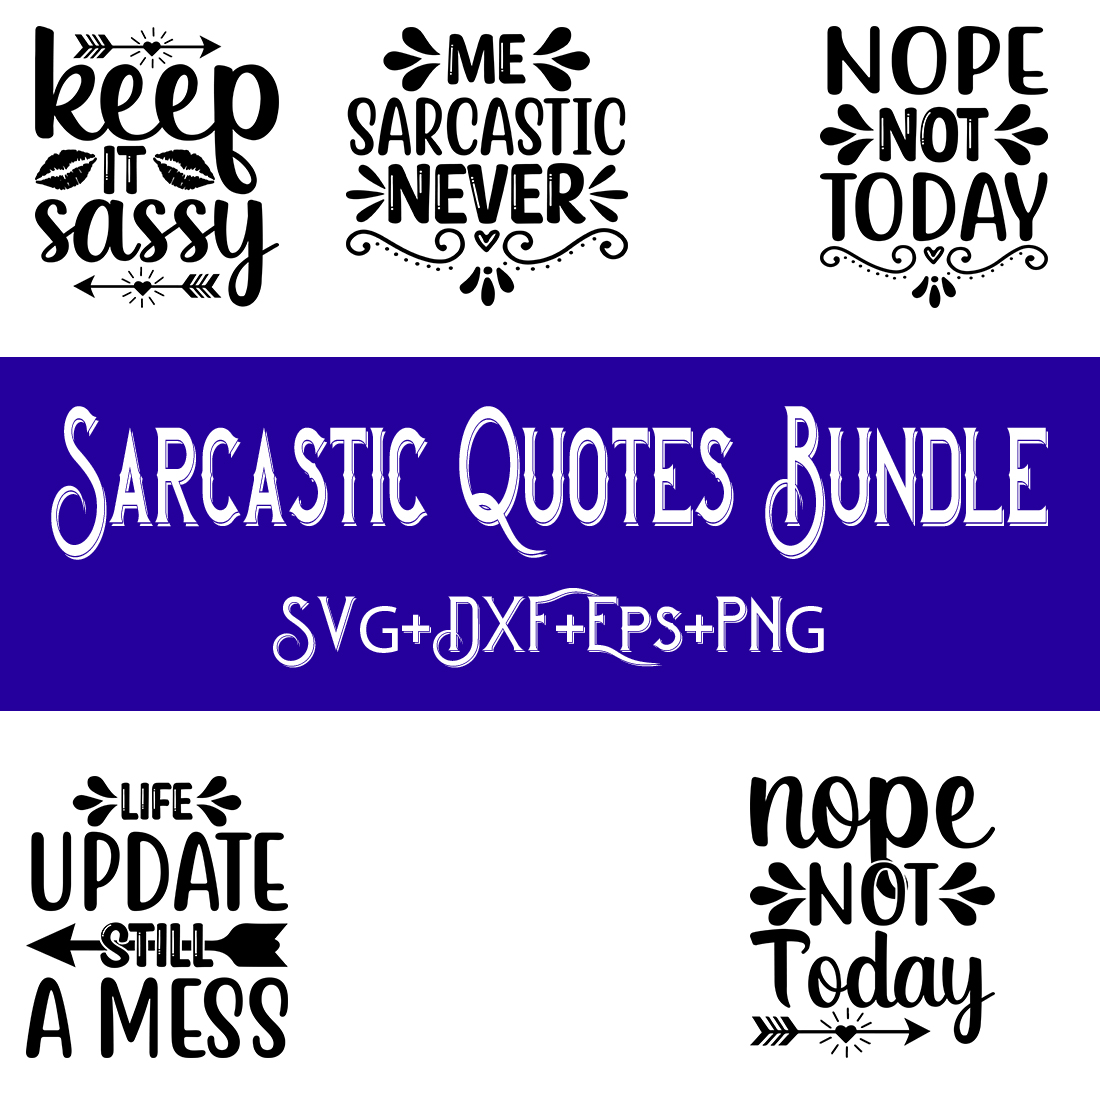 Sarcastic quotes bundle svg and png.